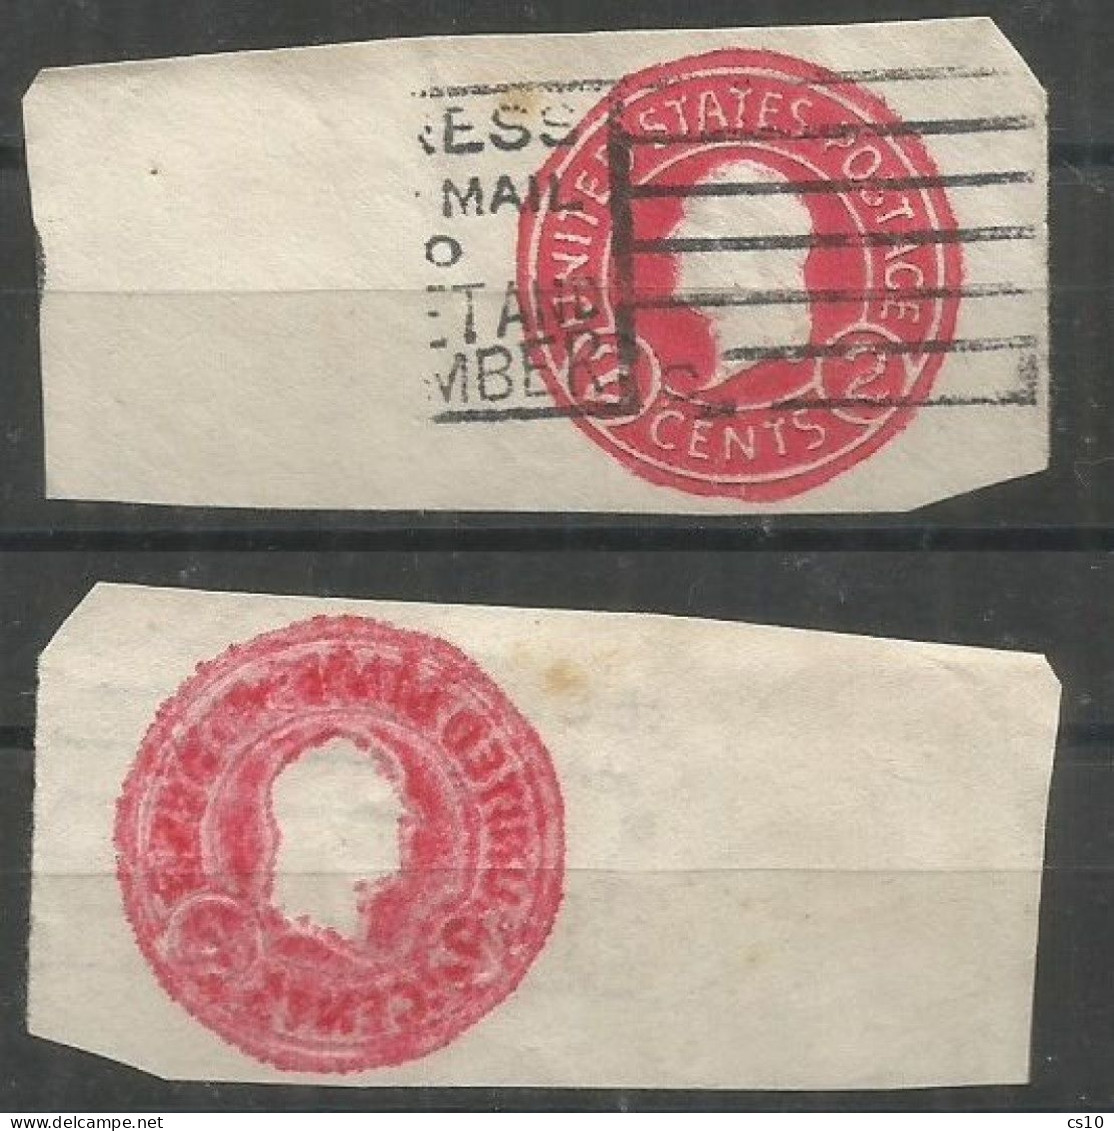 USA Postal History : APO RPO Abroad Offices Canada & Germany Mixed Frnkgs Incl.Presorted 1st Class 7 Scans - Unclassified